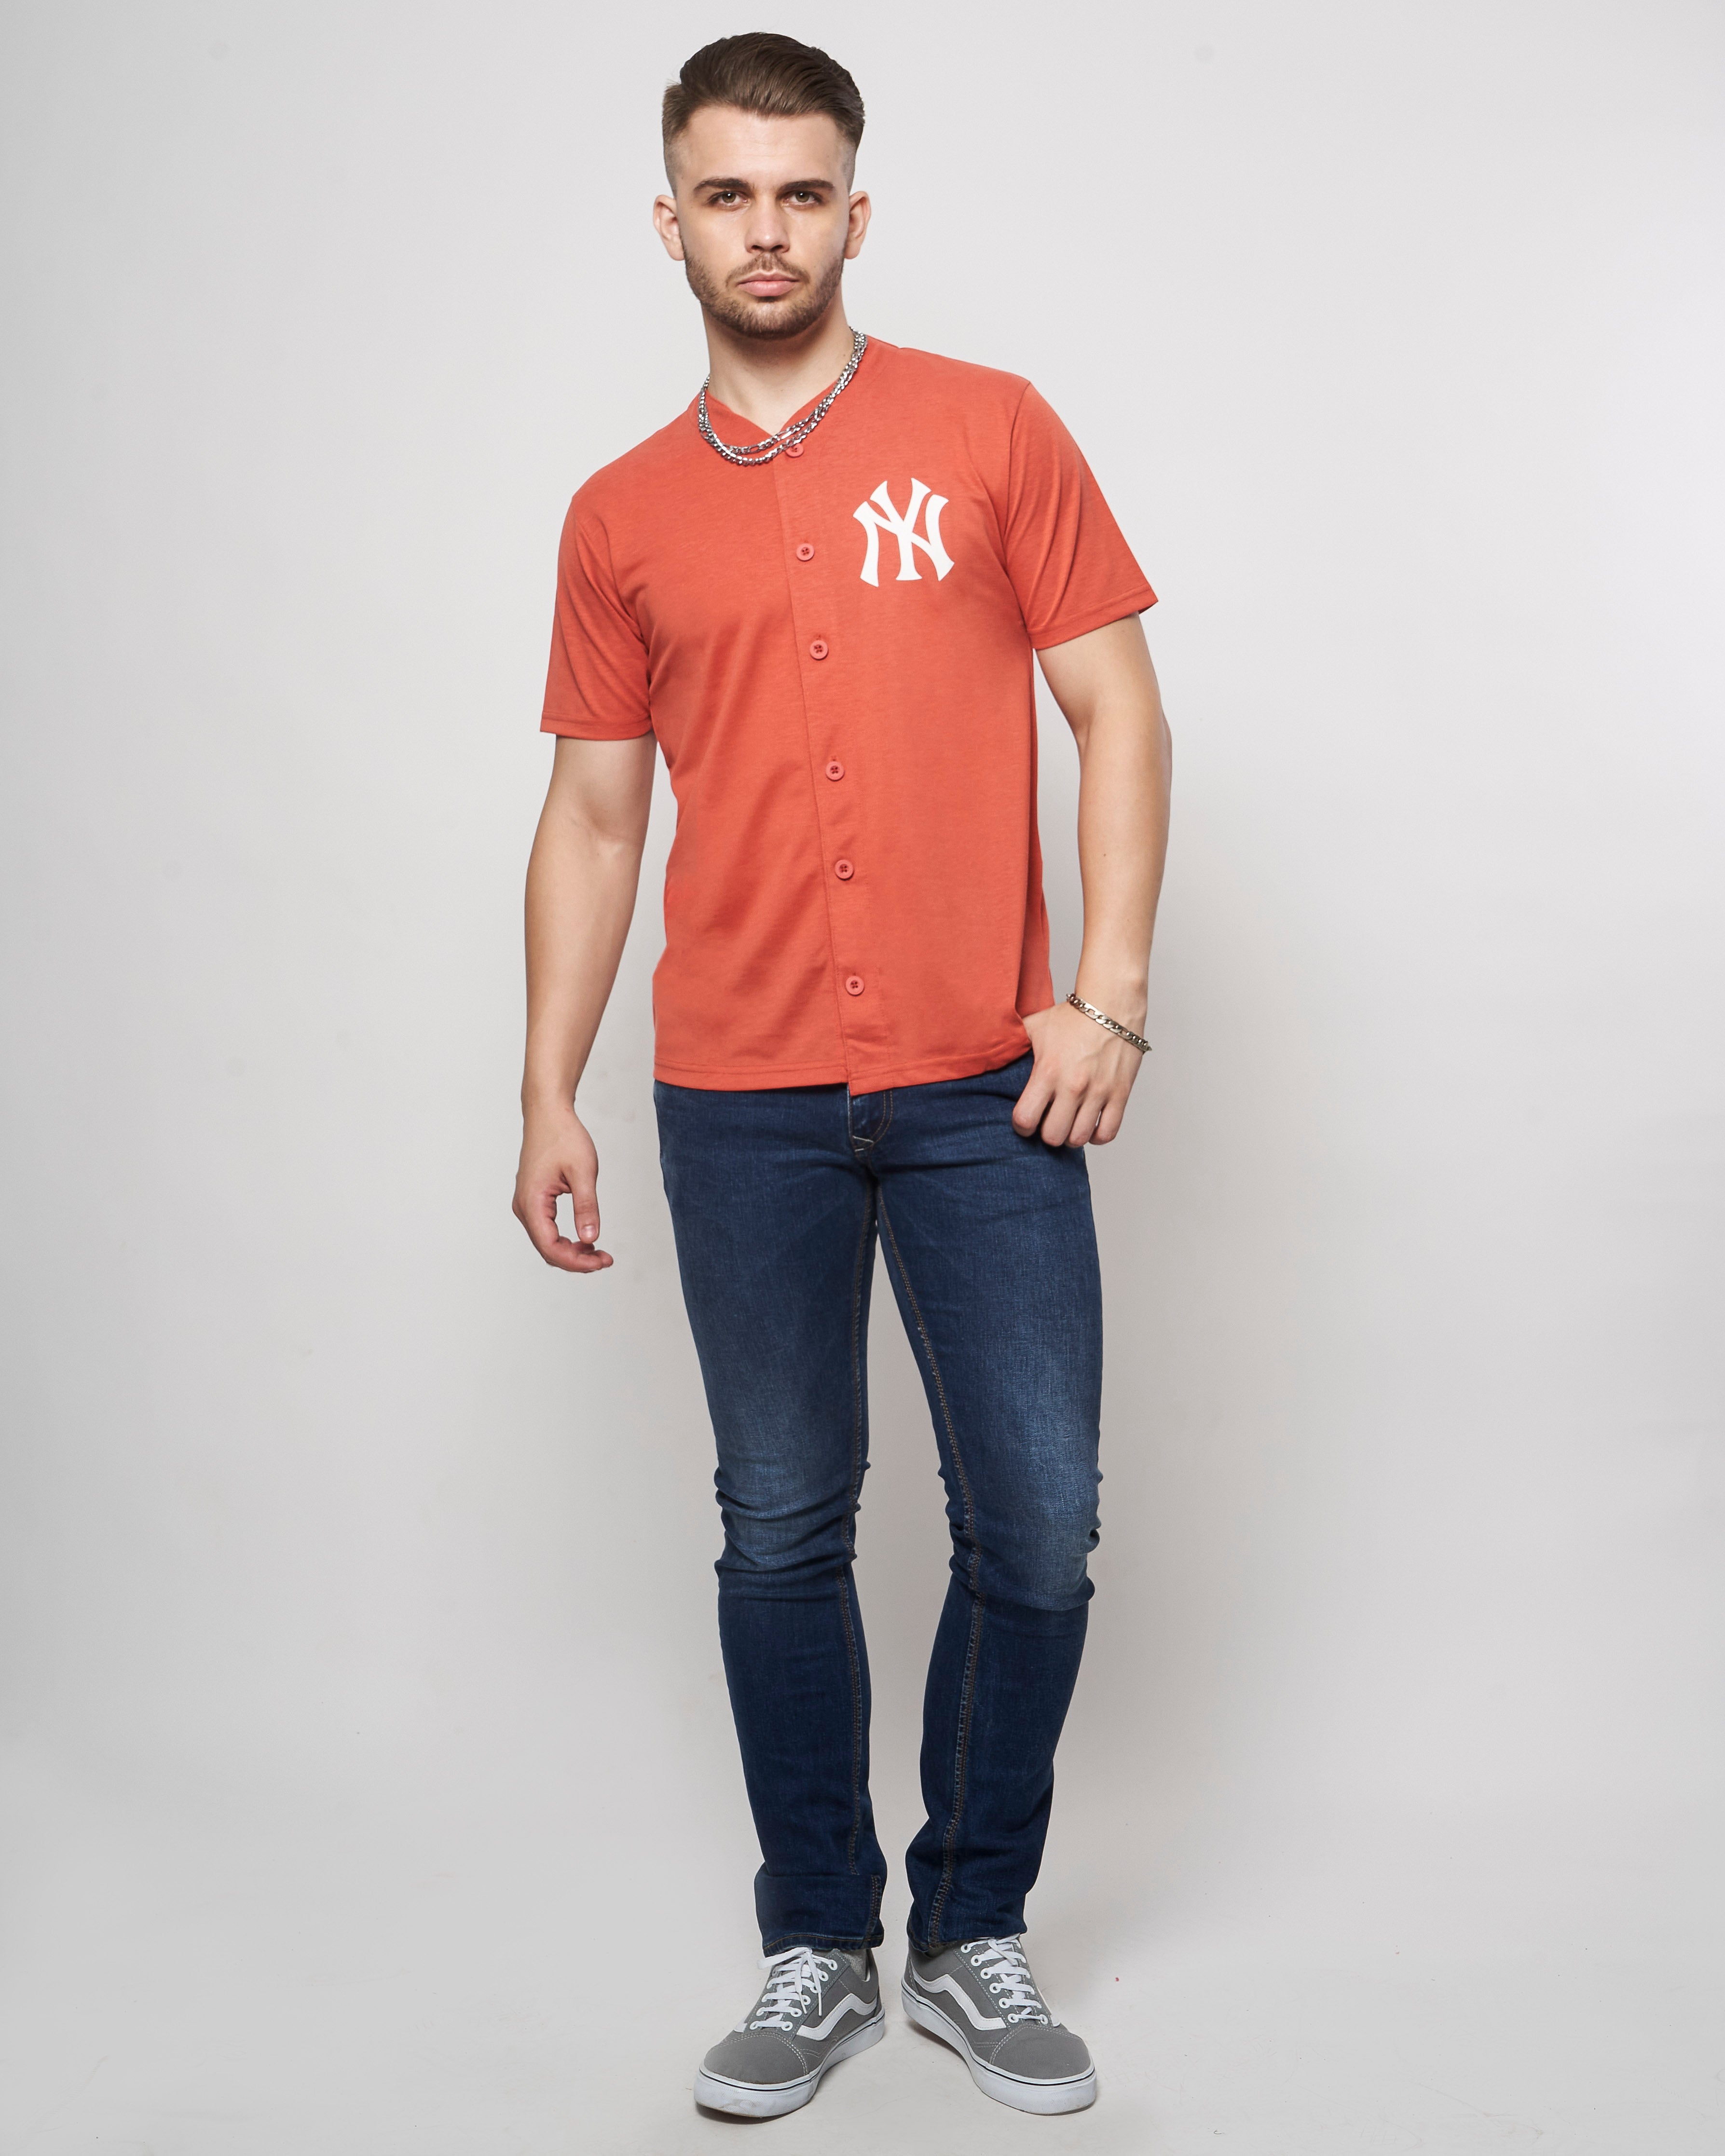 Red NY Button Down Baseball Jersey